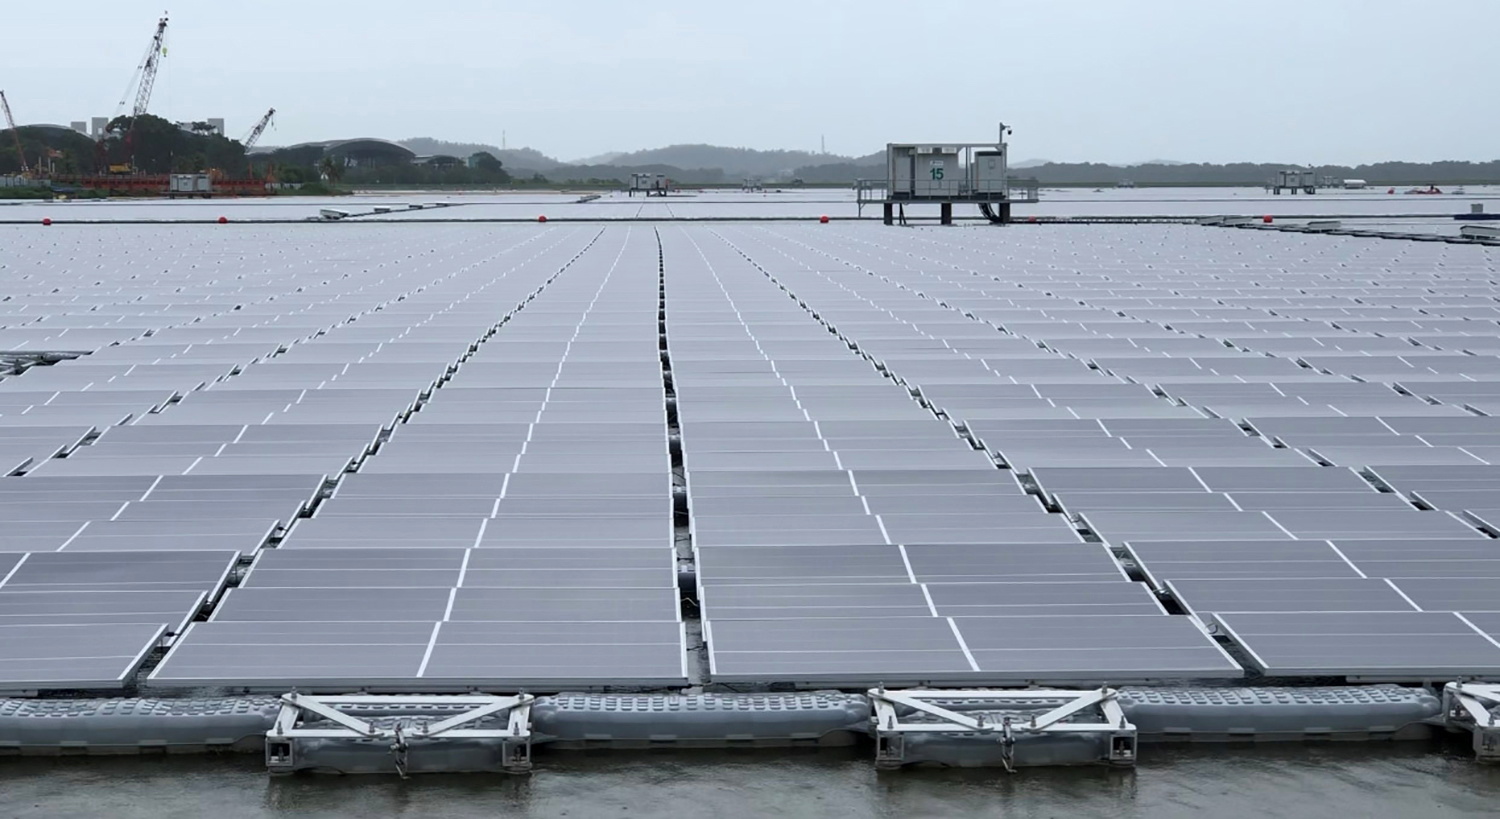 Still image of one of the world's largest floating solar panel farms in Singapore